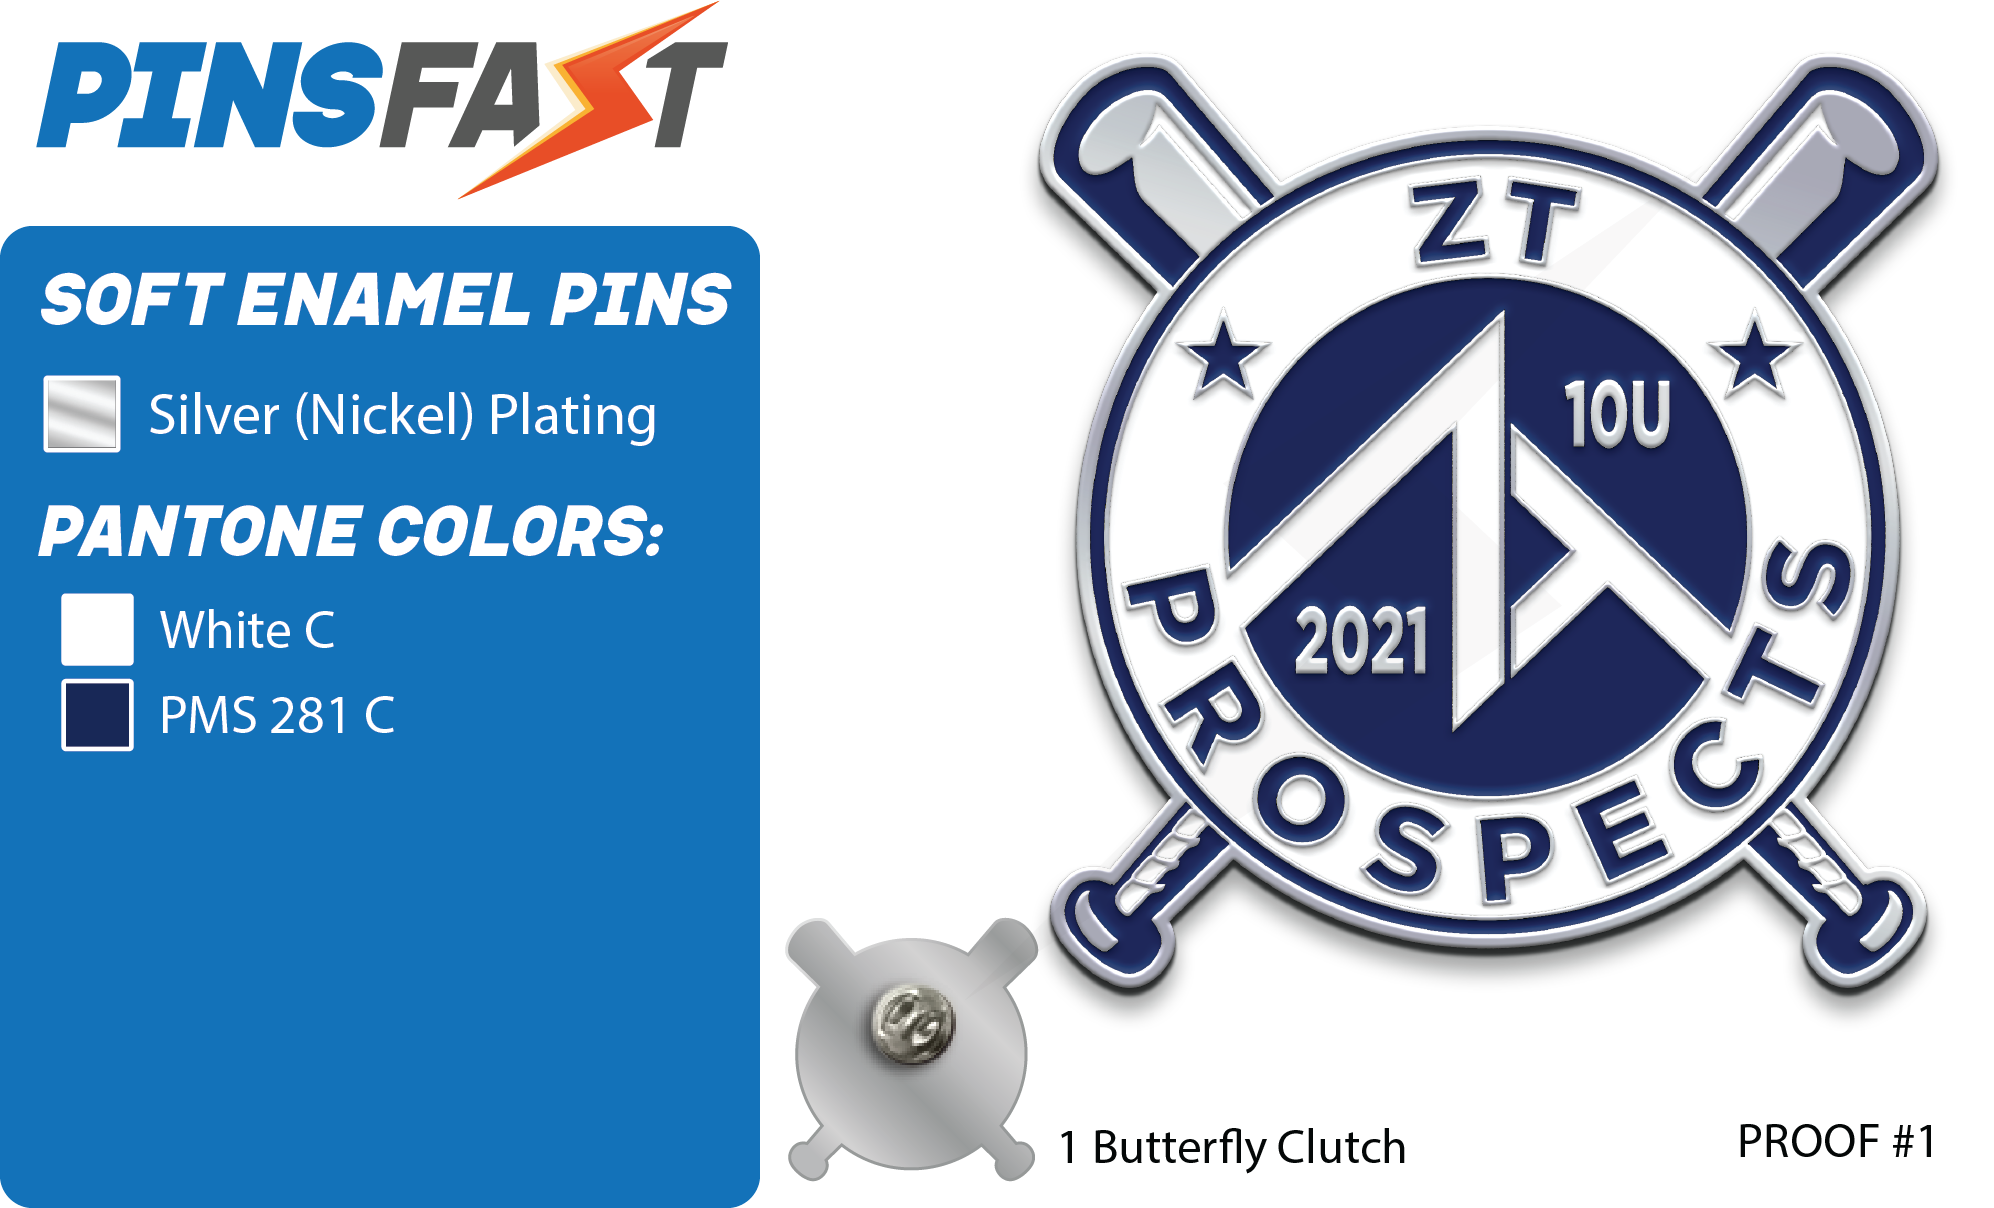 ZT Prospects Trading Pins